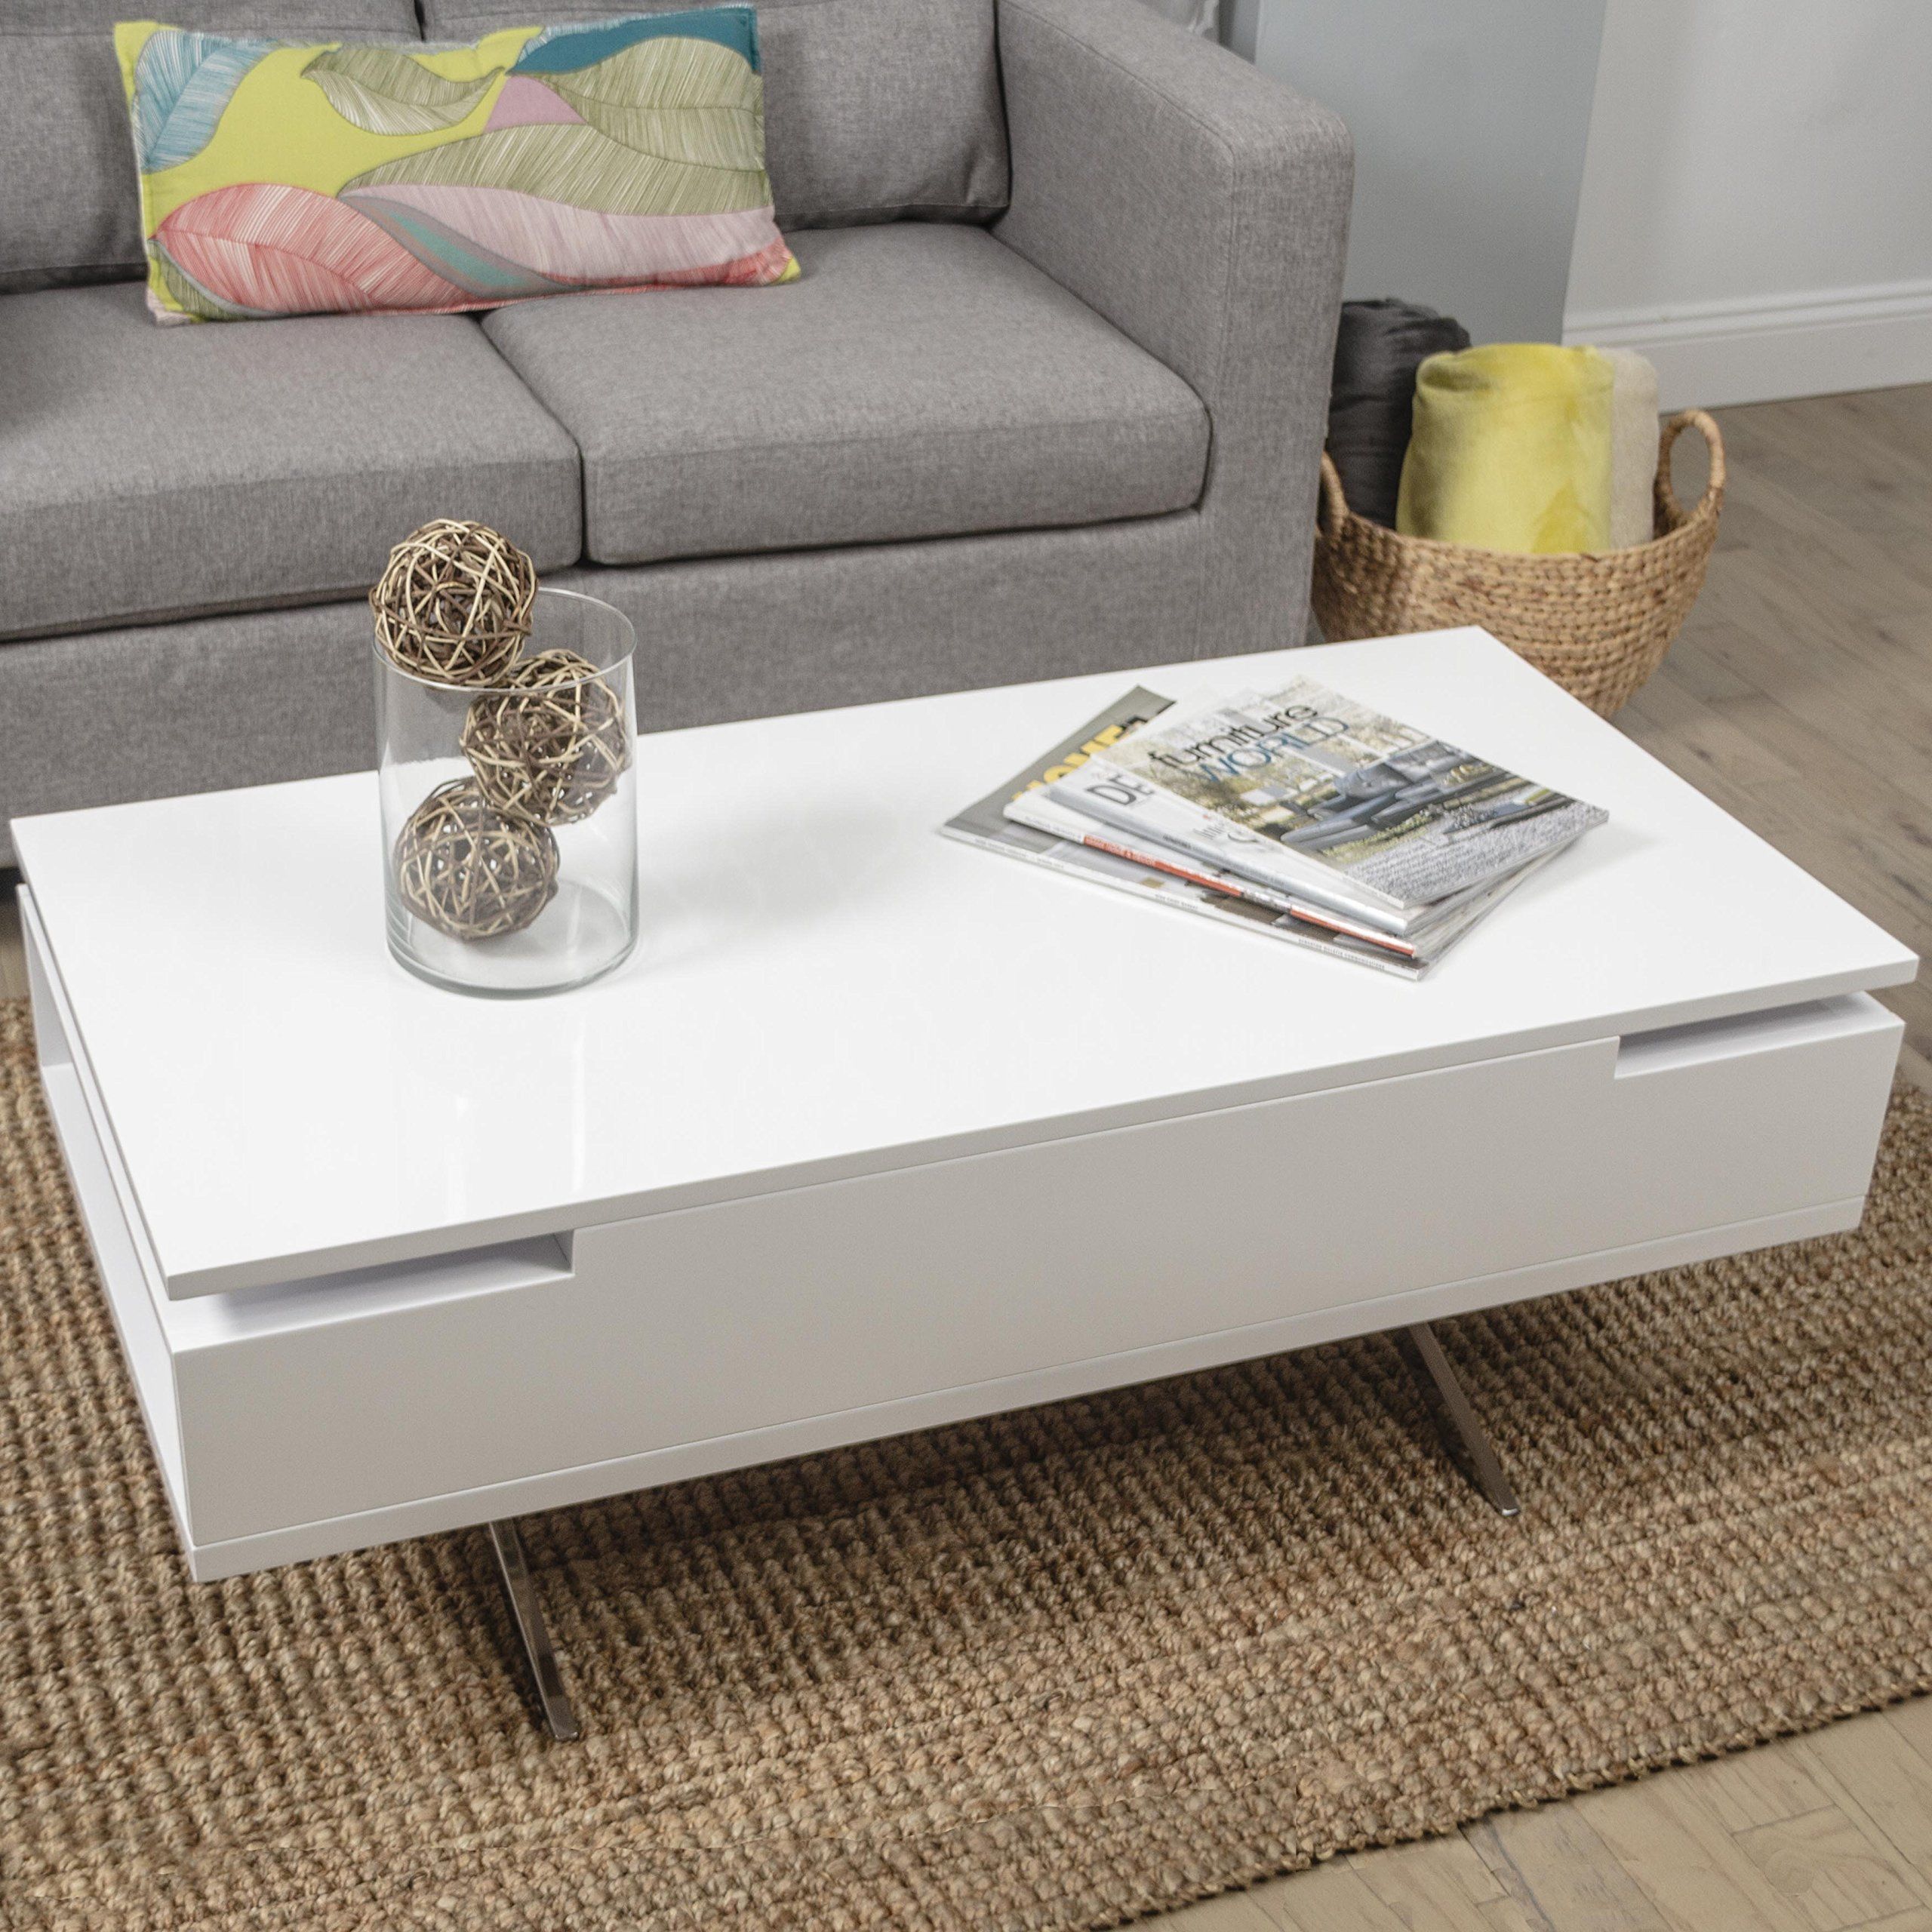 Mix High Gloss Lacquer Wood Stainless Steel Legs White Lifttop Throughout High Gloss Lift Top Coffee Tables (Gallery 1 of 21)